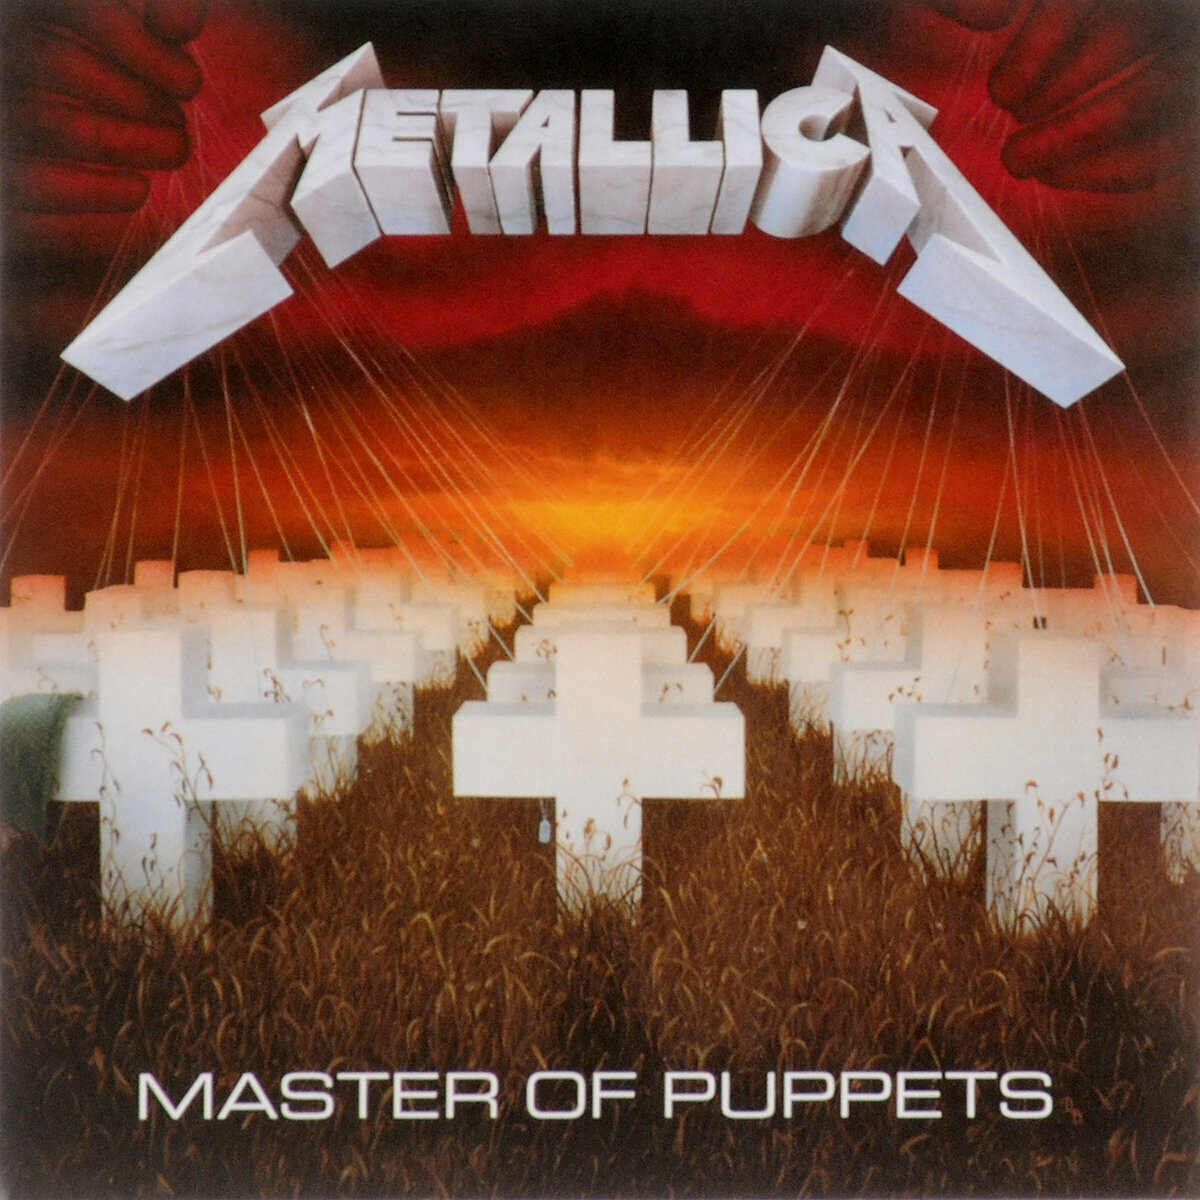 AUDIO CD Metallica - Master of Puppets (Remastered) (1 CD)